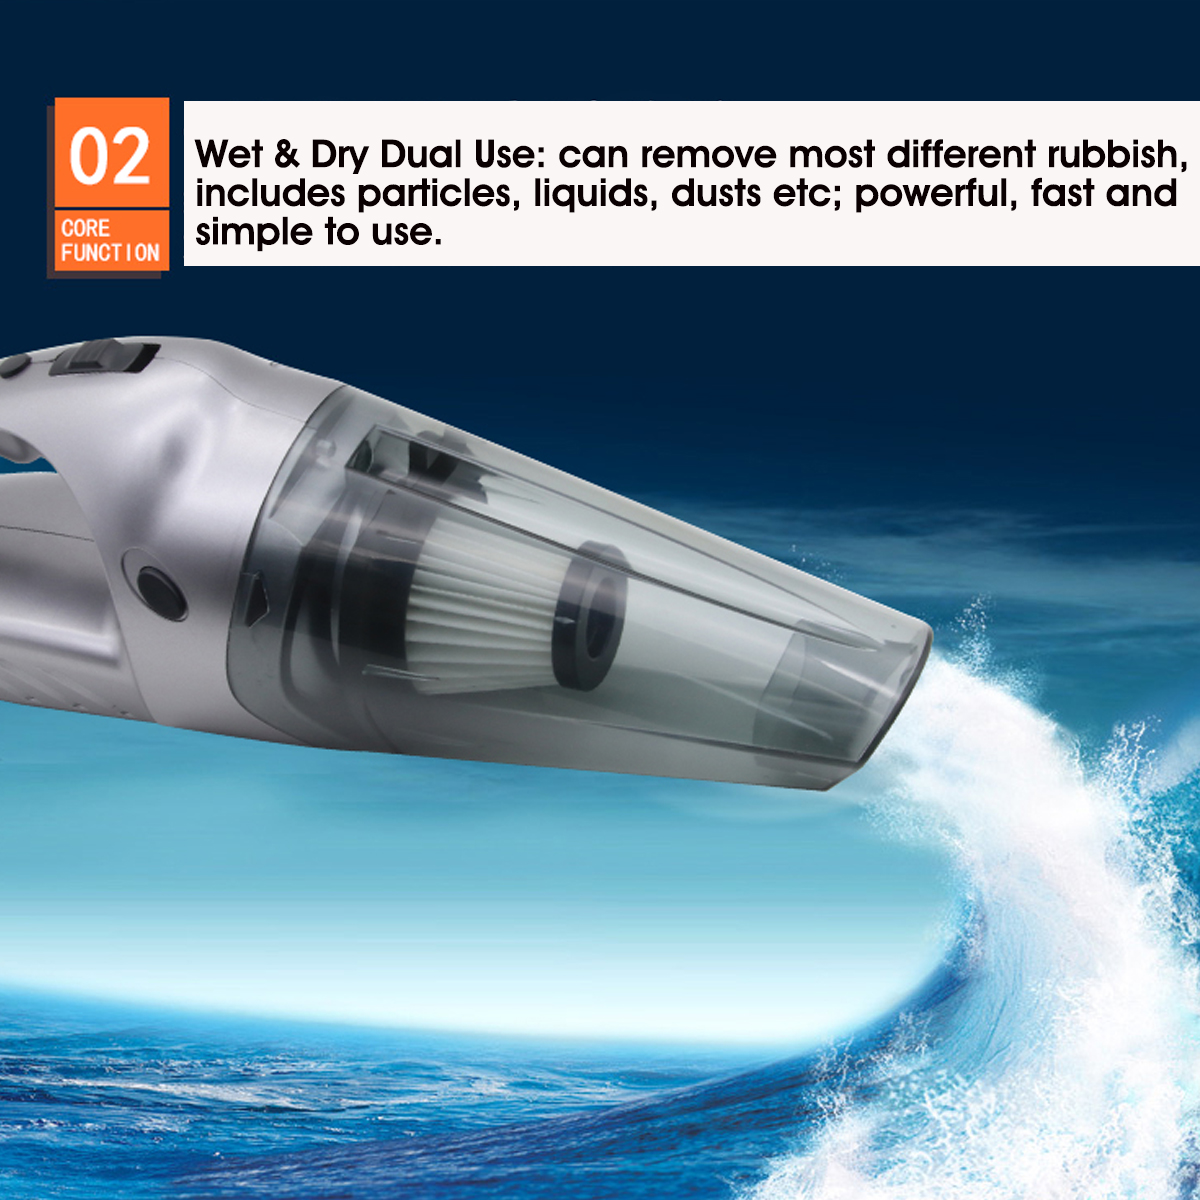 120W-Portable-Auto-Car-Handheld-Vacuum-Cleaner-Duster-Wet--Dry-Dirt-Suction-with-LED-Light-1624459-3